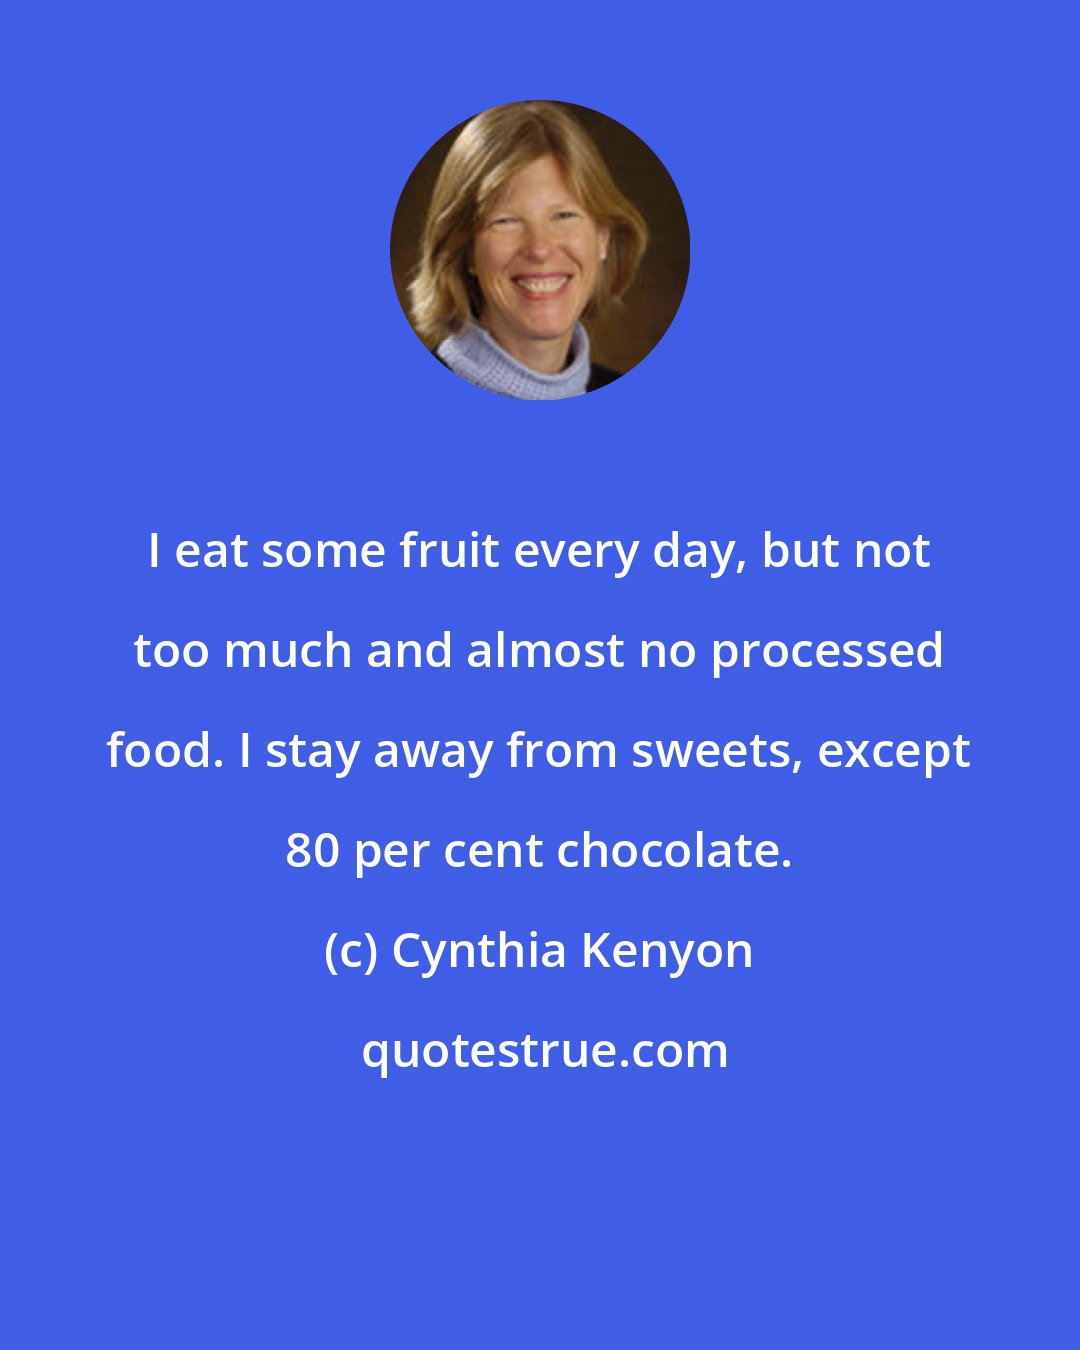 Cynthia Kenyon: I eat some fruit every day, but not too much and almost no processed food. I stay away from sweets, except 80 per cent chocolate.